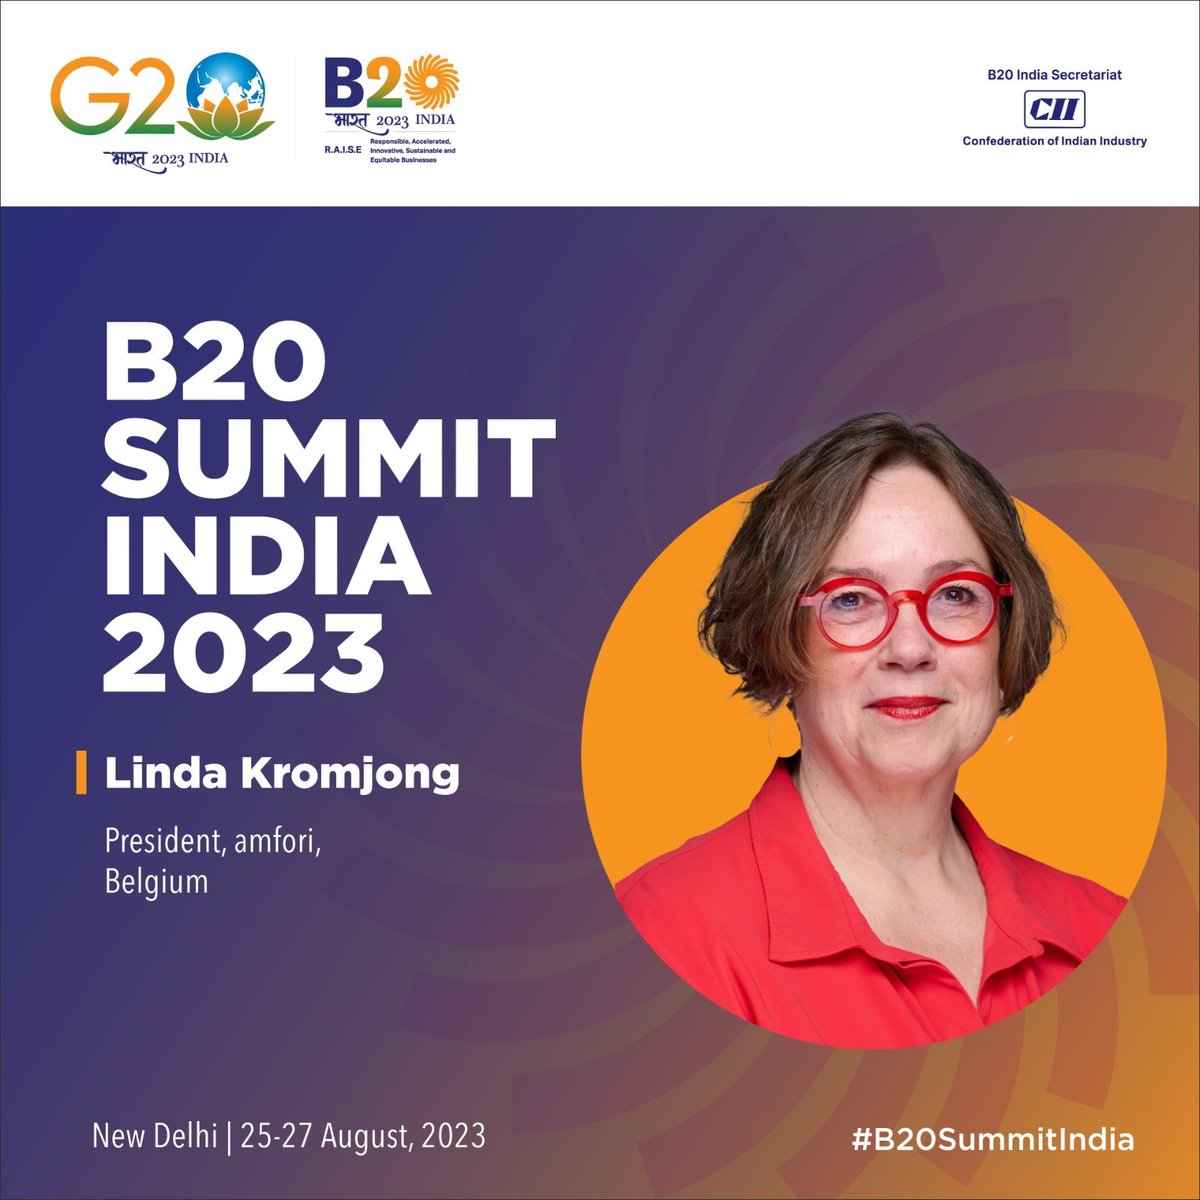 We are pleased to have with us Linda Kromjong, President, amfori, Belgium, addressing the B20 Summit India 2023. Know more at: b20summit.in/index.html Stay tuned #B20SummitIndia #B20SummitIndia #B20India #G20India2023 #B20India2023 #B20GlobalDialogue #G20India #G20 #B20…